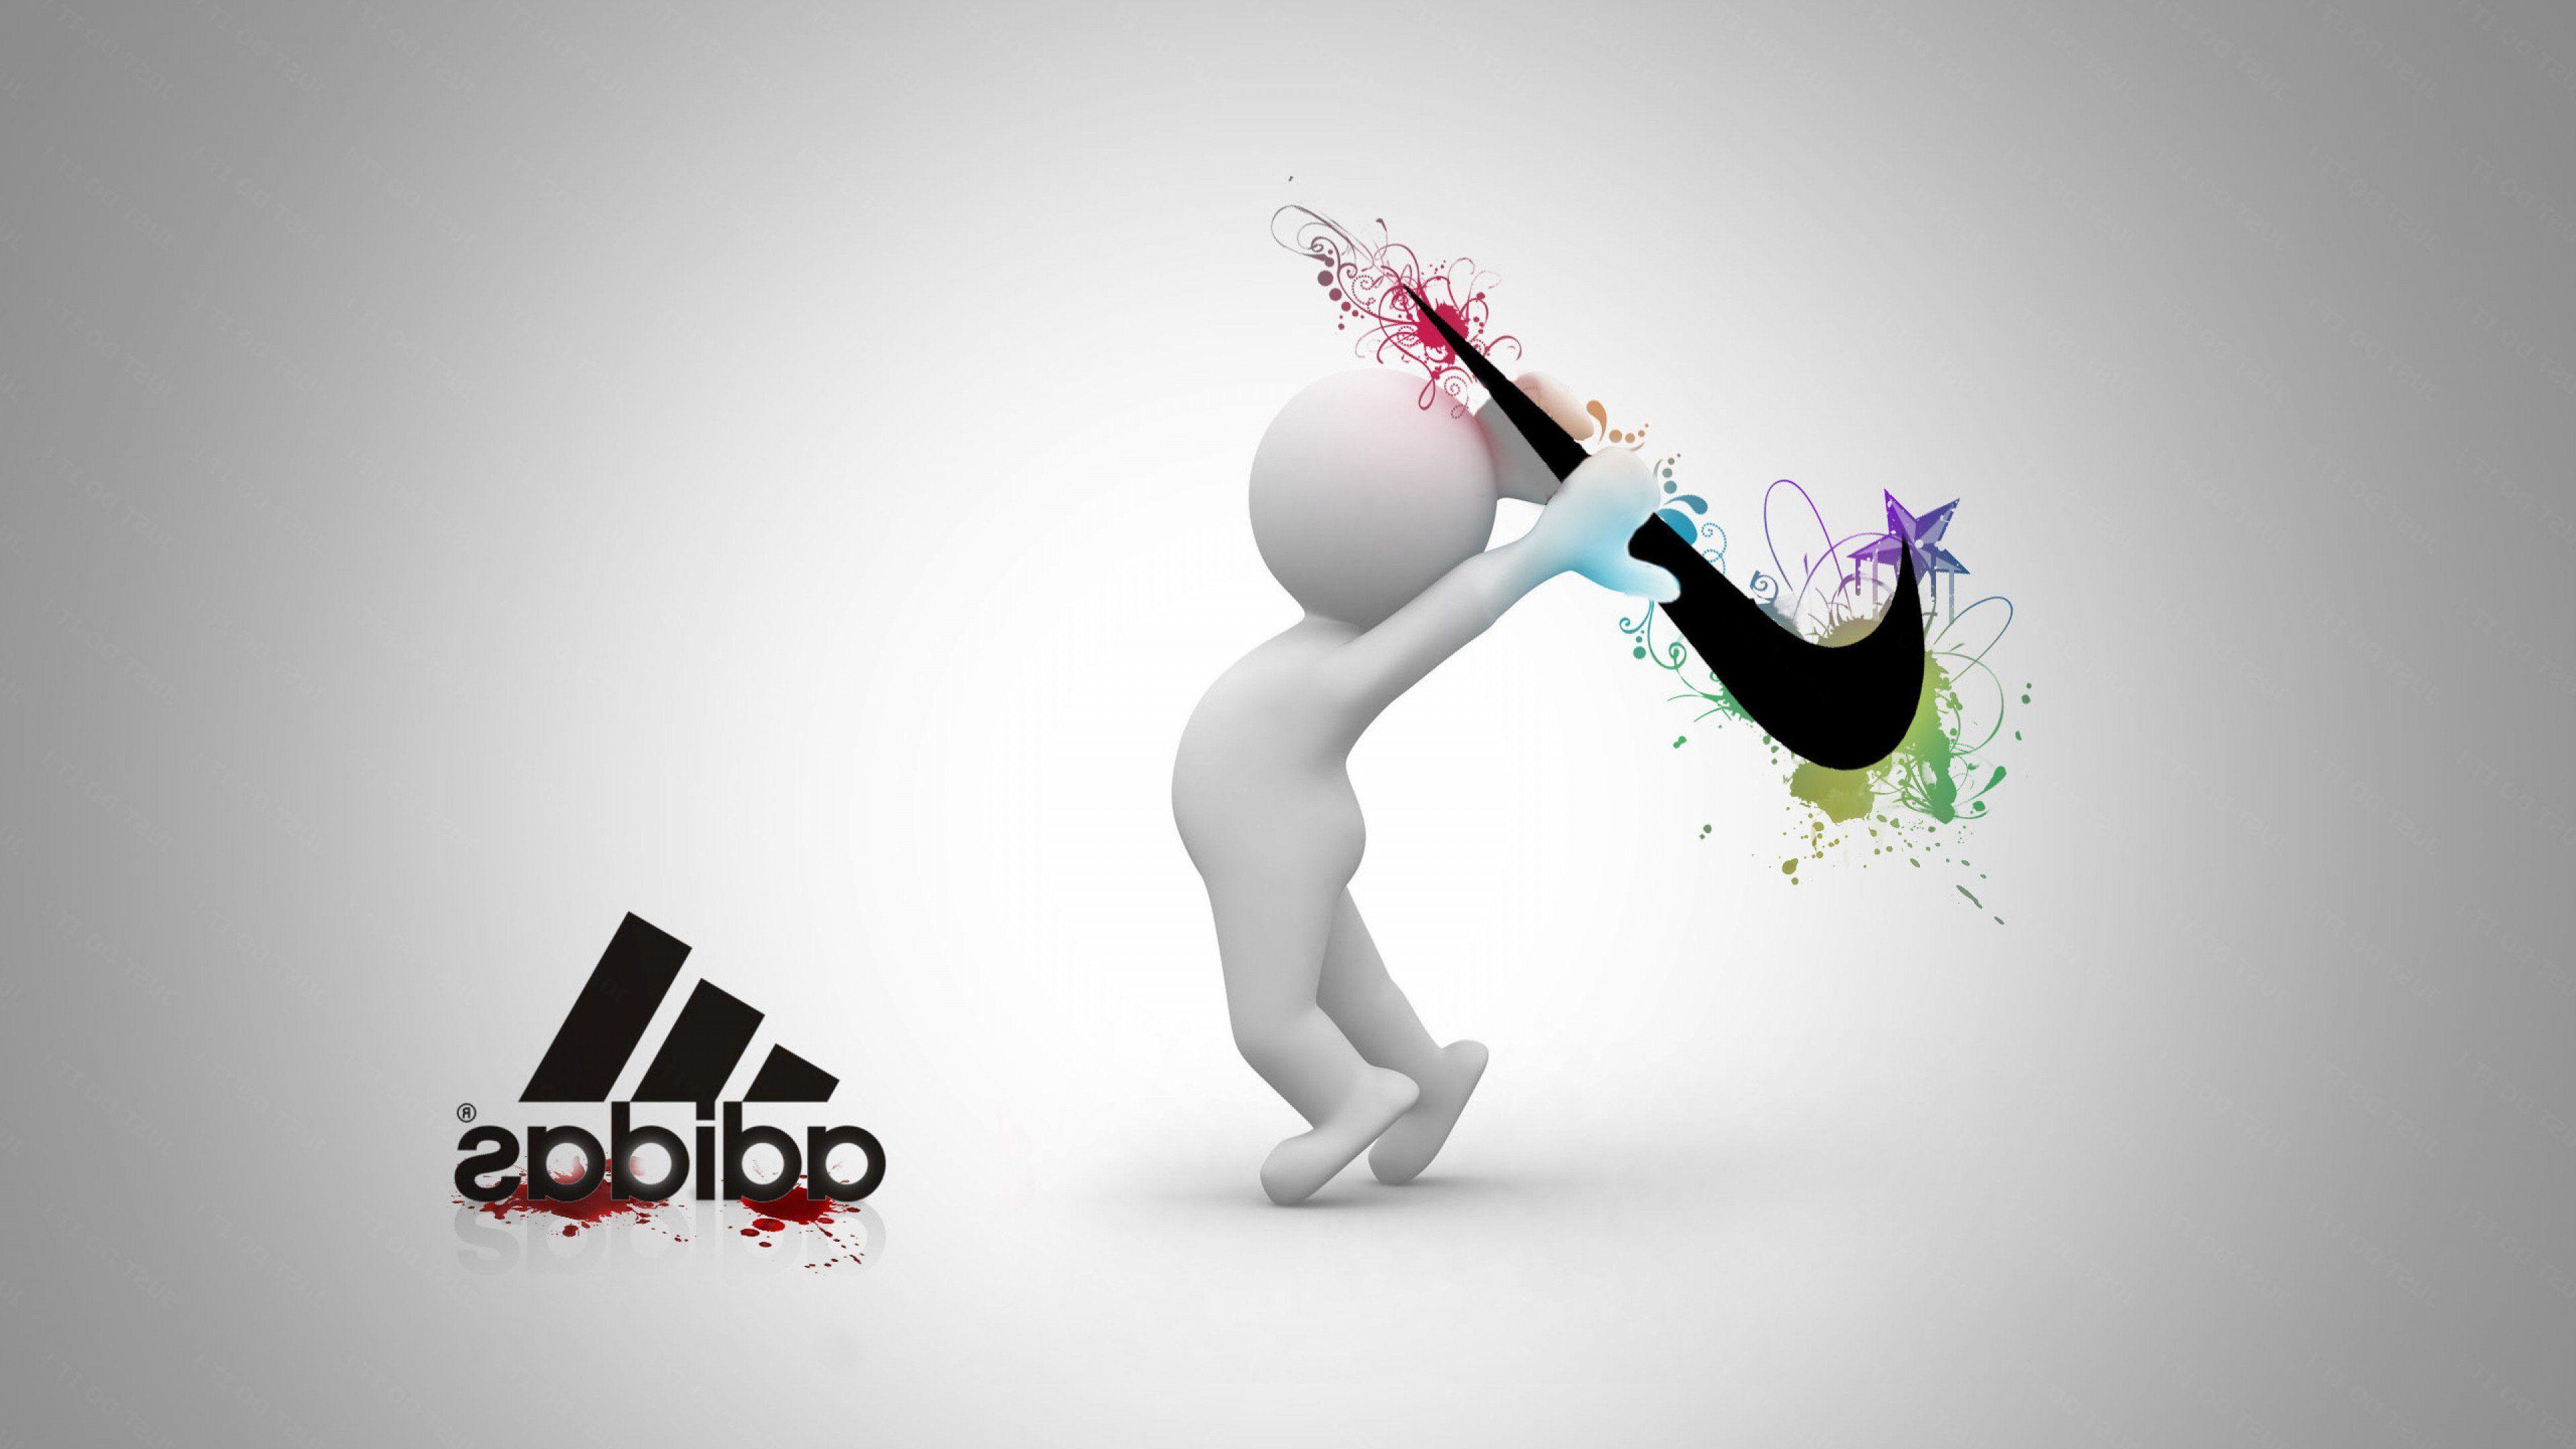 cool wallpapers of adidas